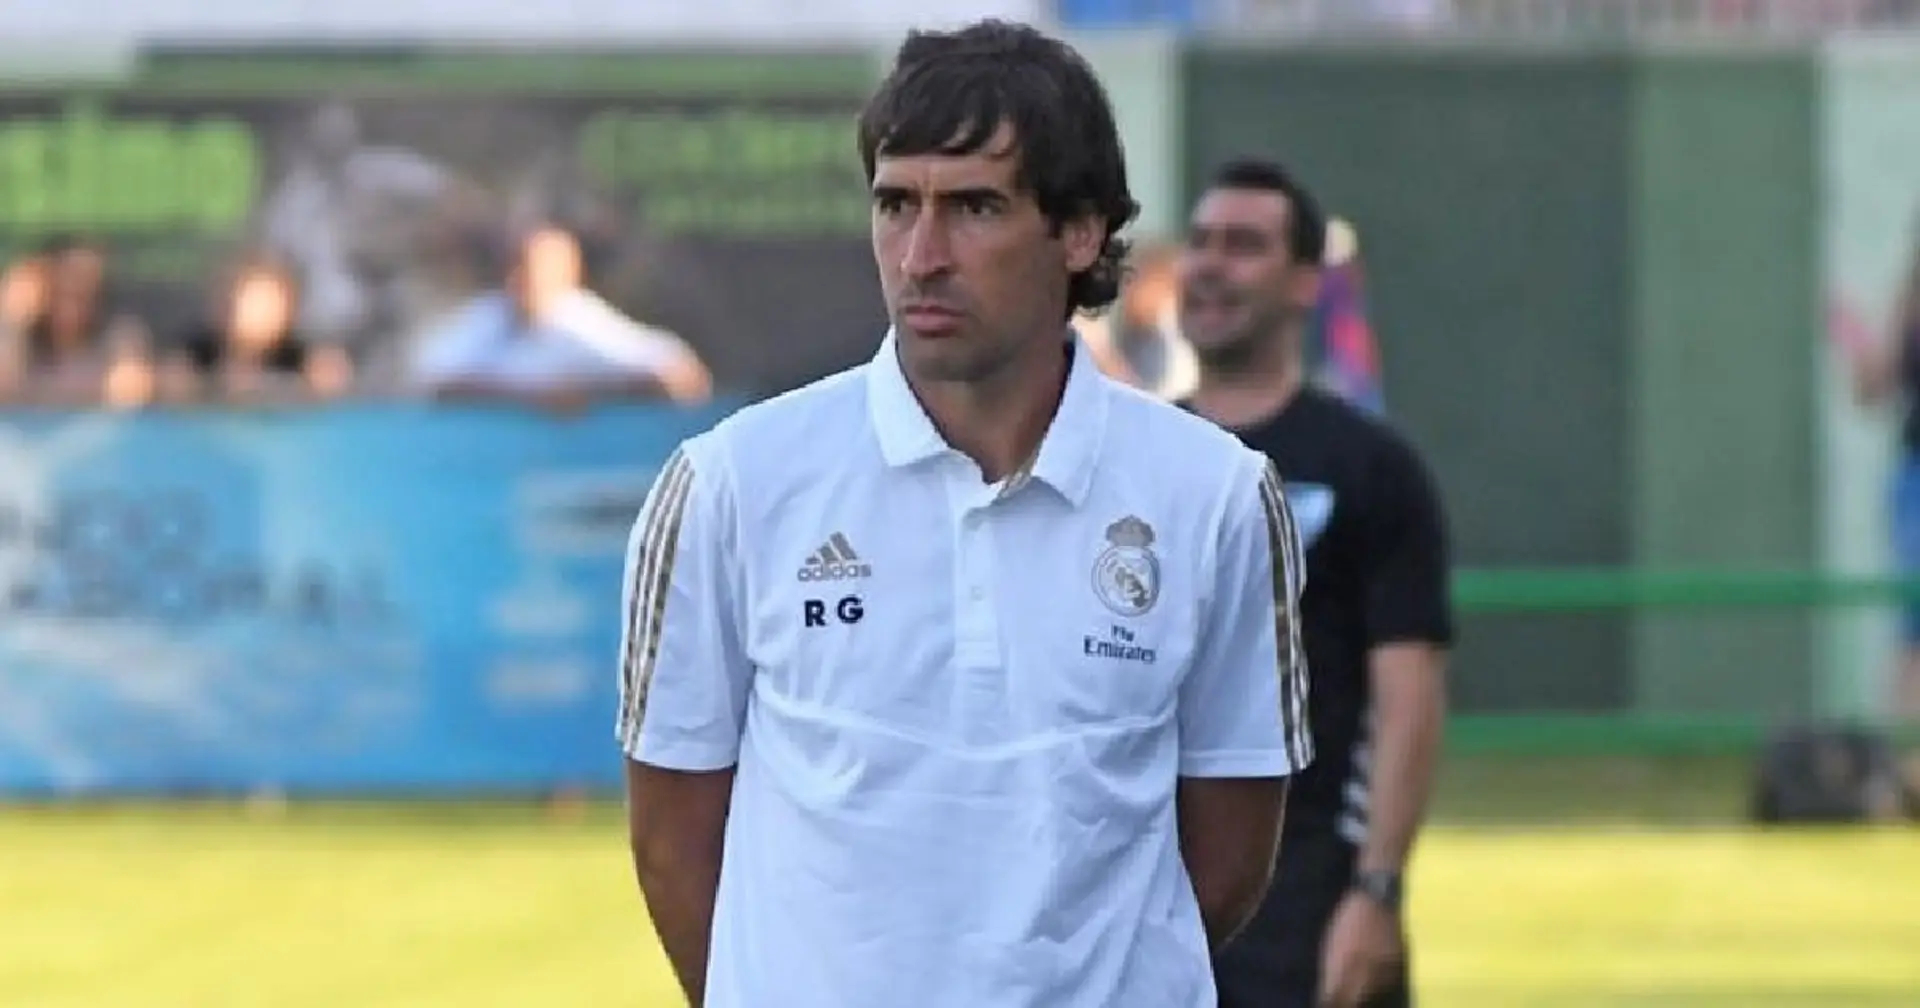 Raul 'rejects' top coaching job to stay at Real Madrid Castilla